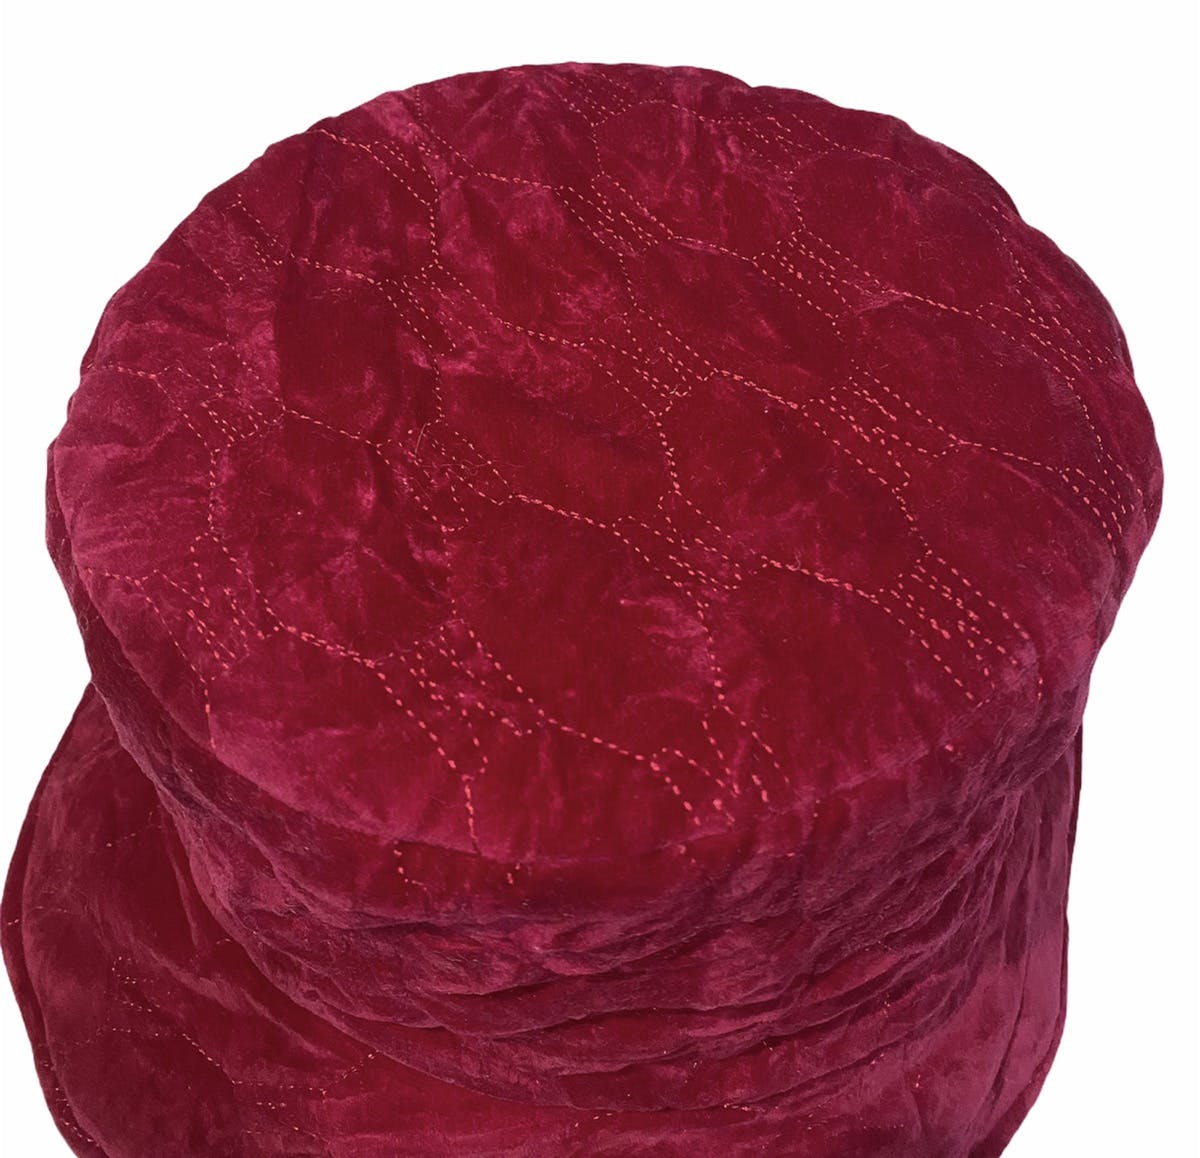 VINTAGE MOSCHINO CHEAP AND CHIC VELVET BUCKET HAT / HAT - 3